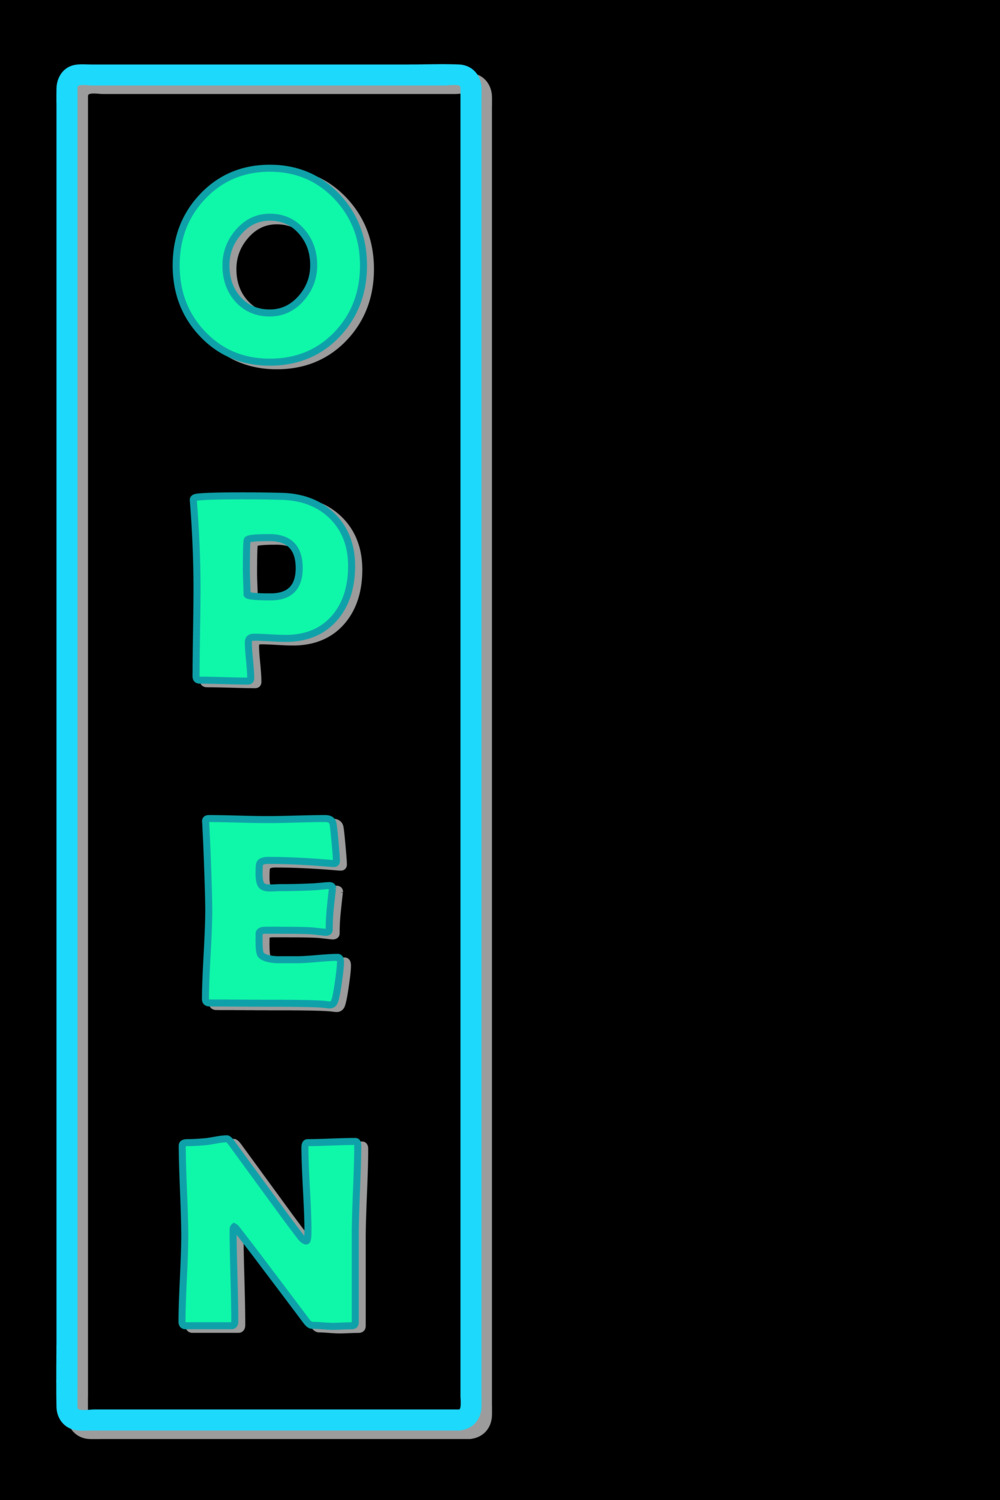 Neon green open sign on a black background.